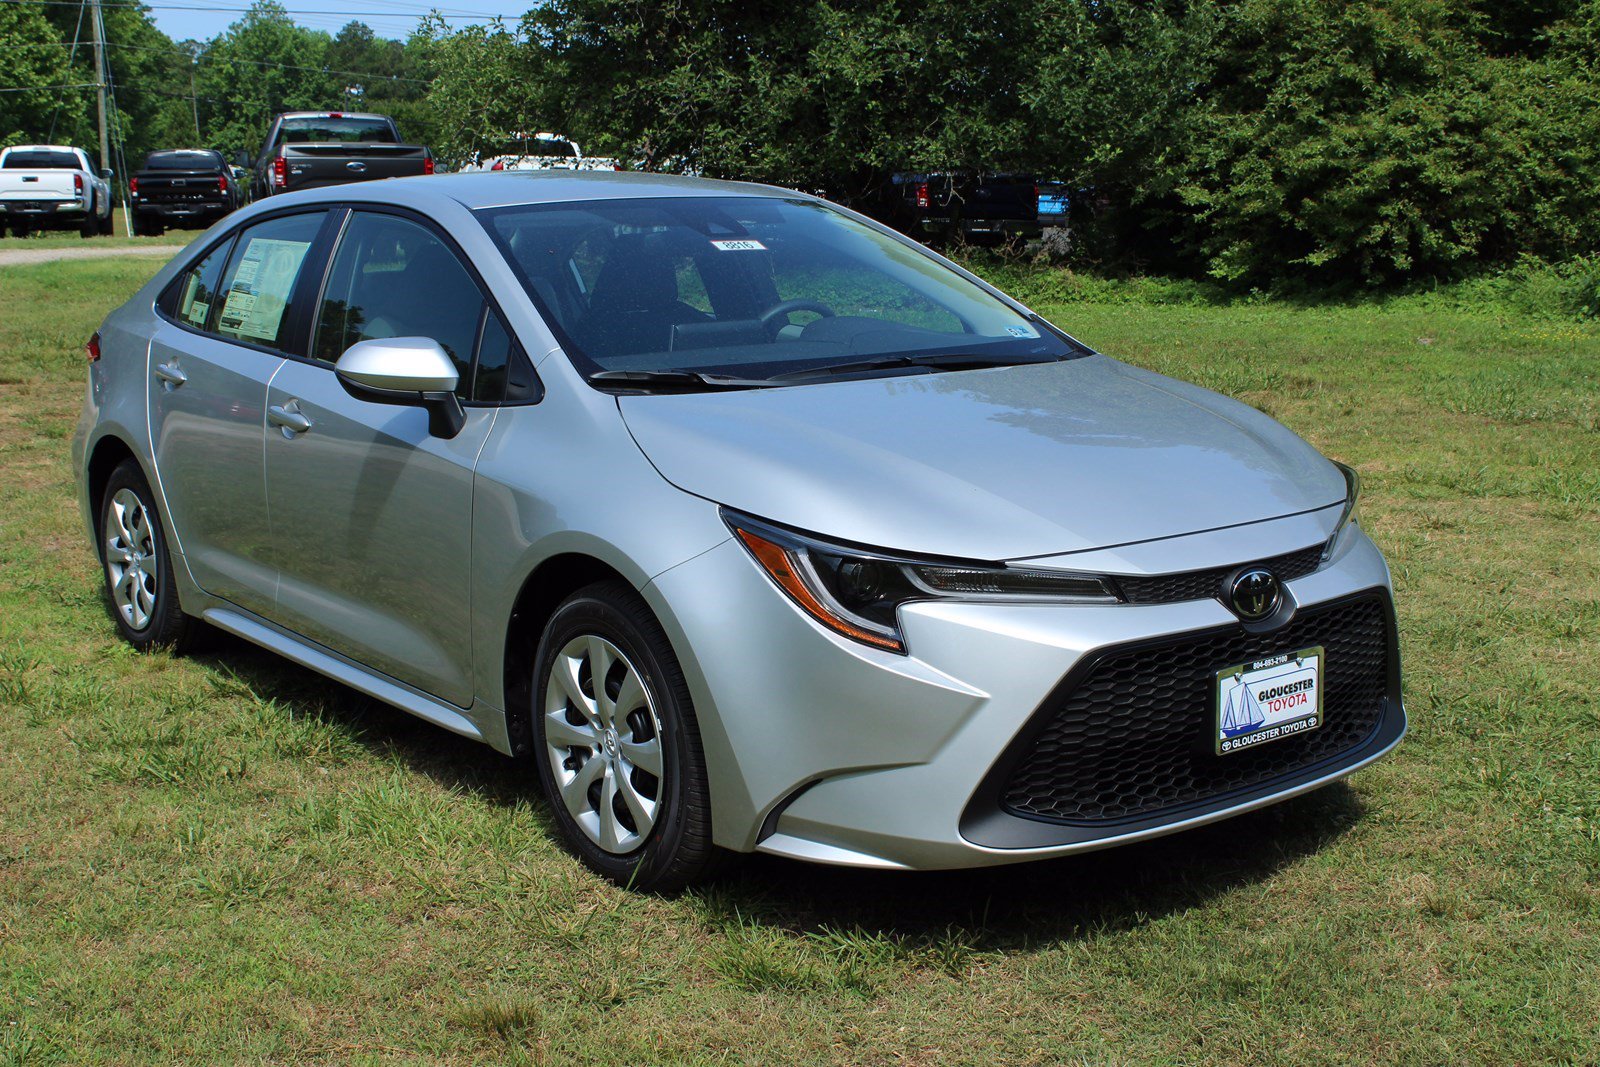 New 2020 Toyota Corolla LE 4dr Car in Gloucester 8816 Gloucester Toyota